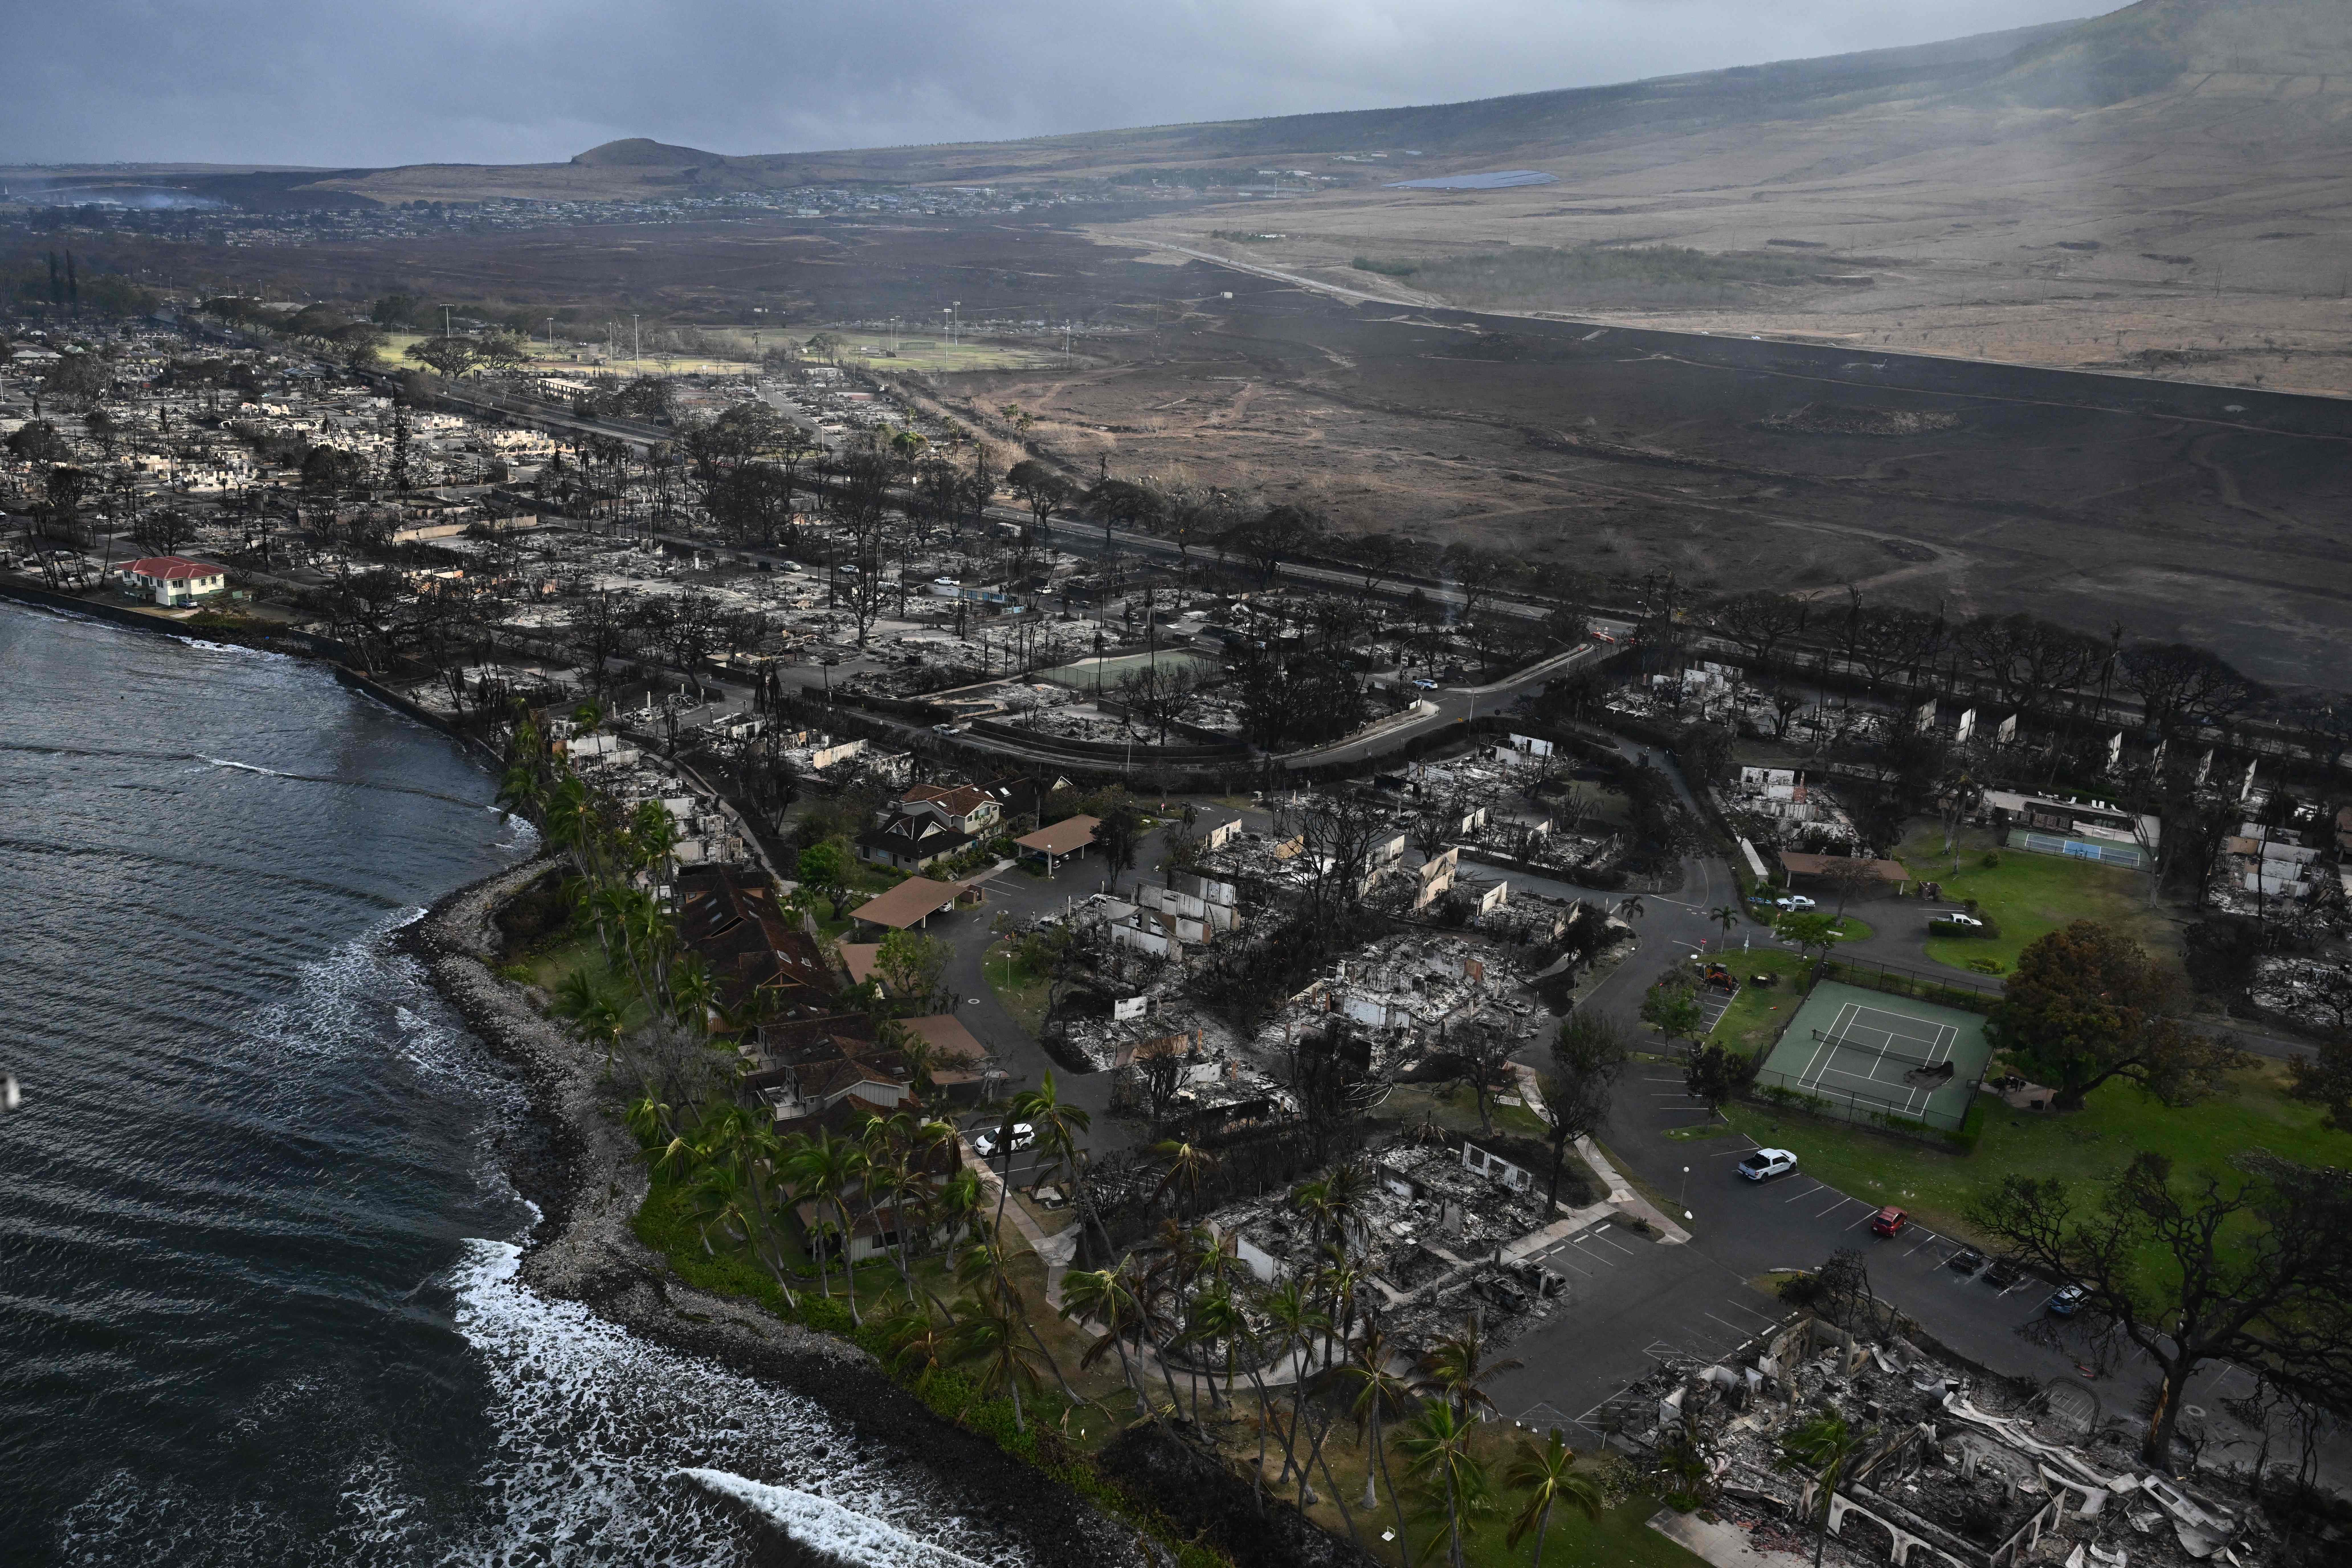 An aerial view shows destruction caused by a wildfire in Lahaina, Hawaii, on August 10.